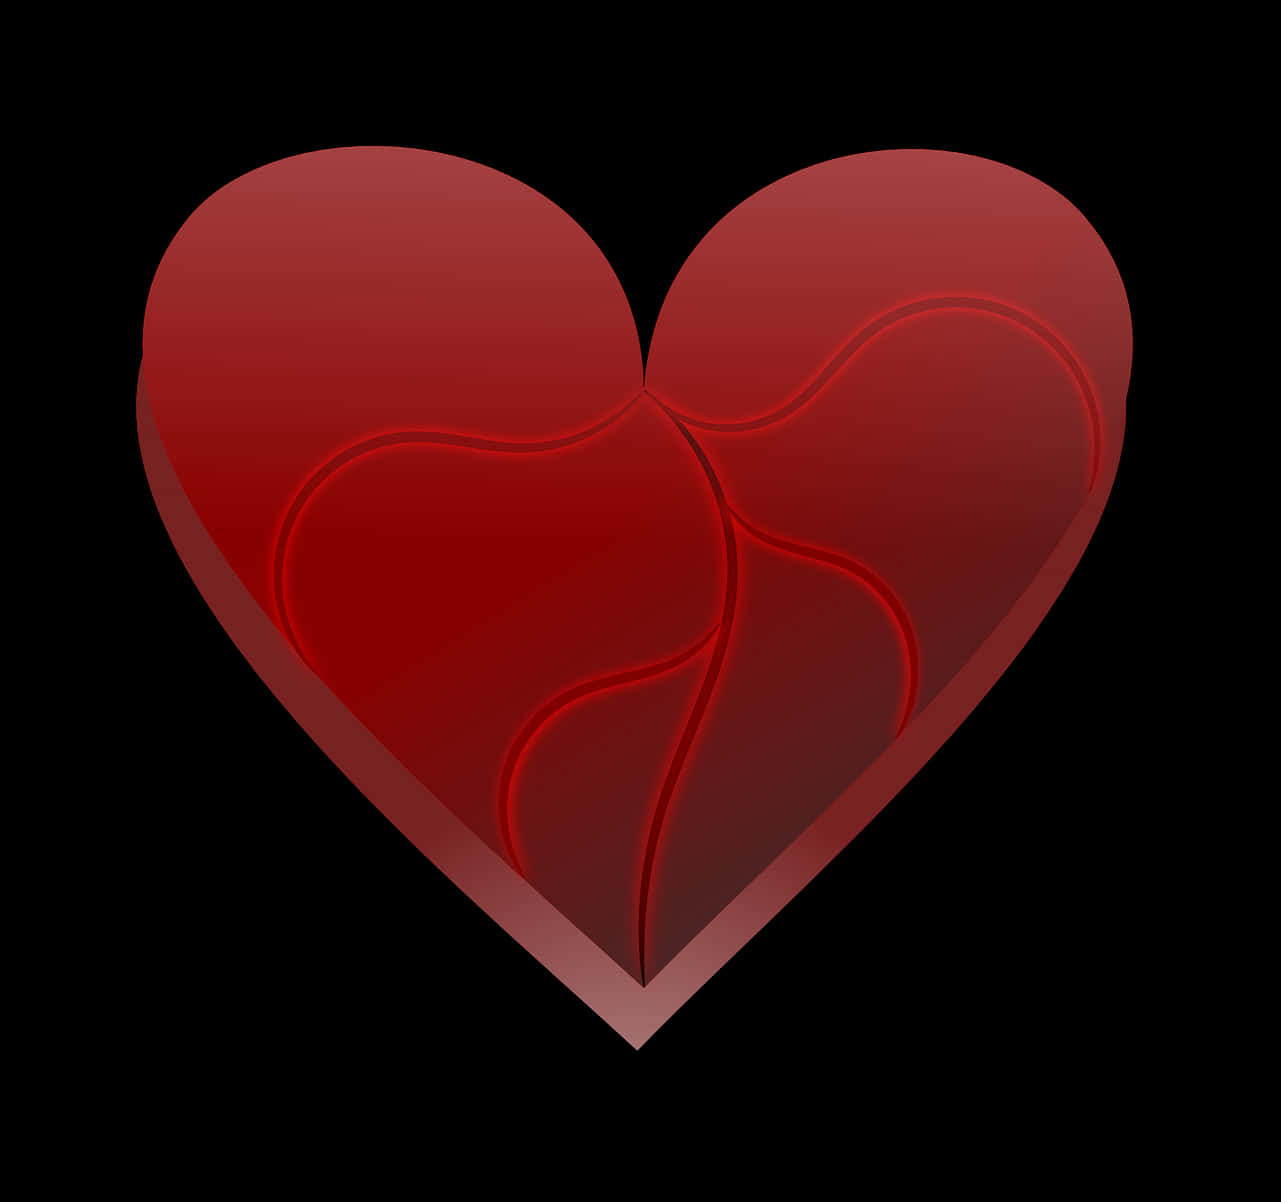 A Red Heart With A Black Background